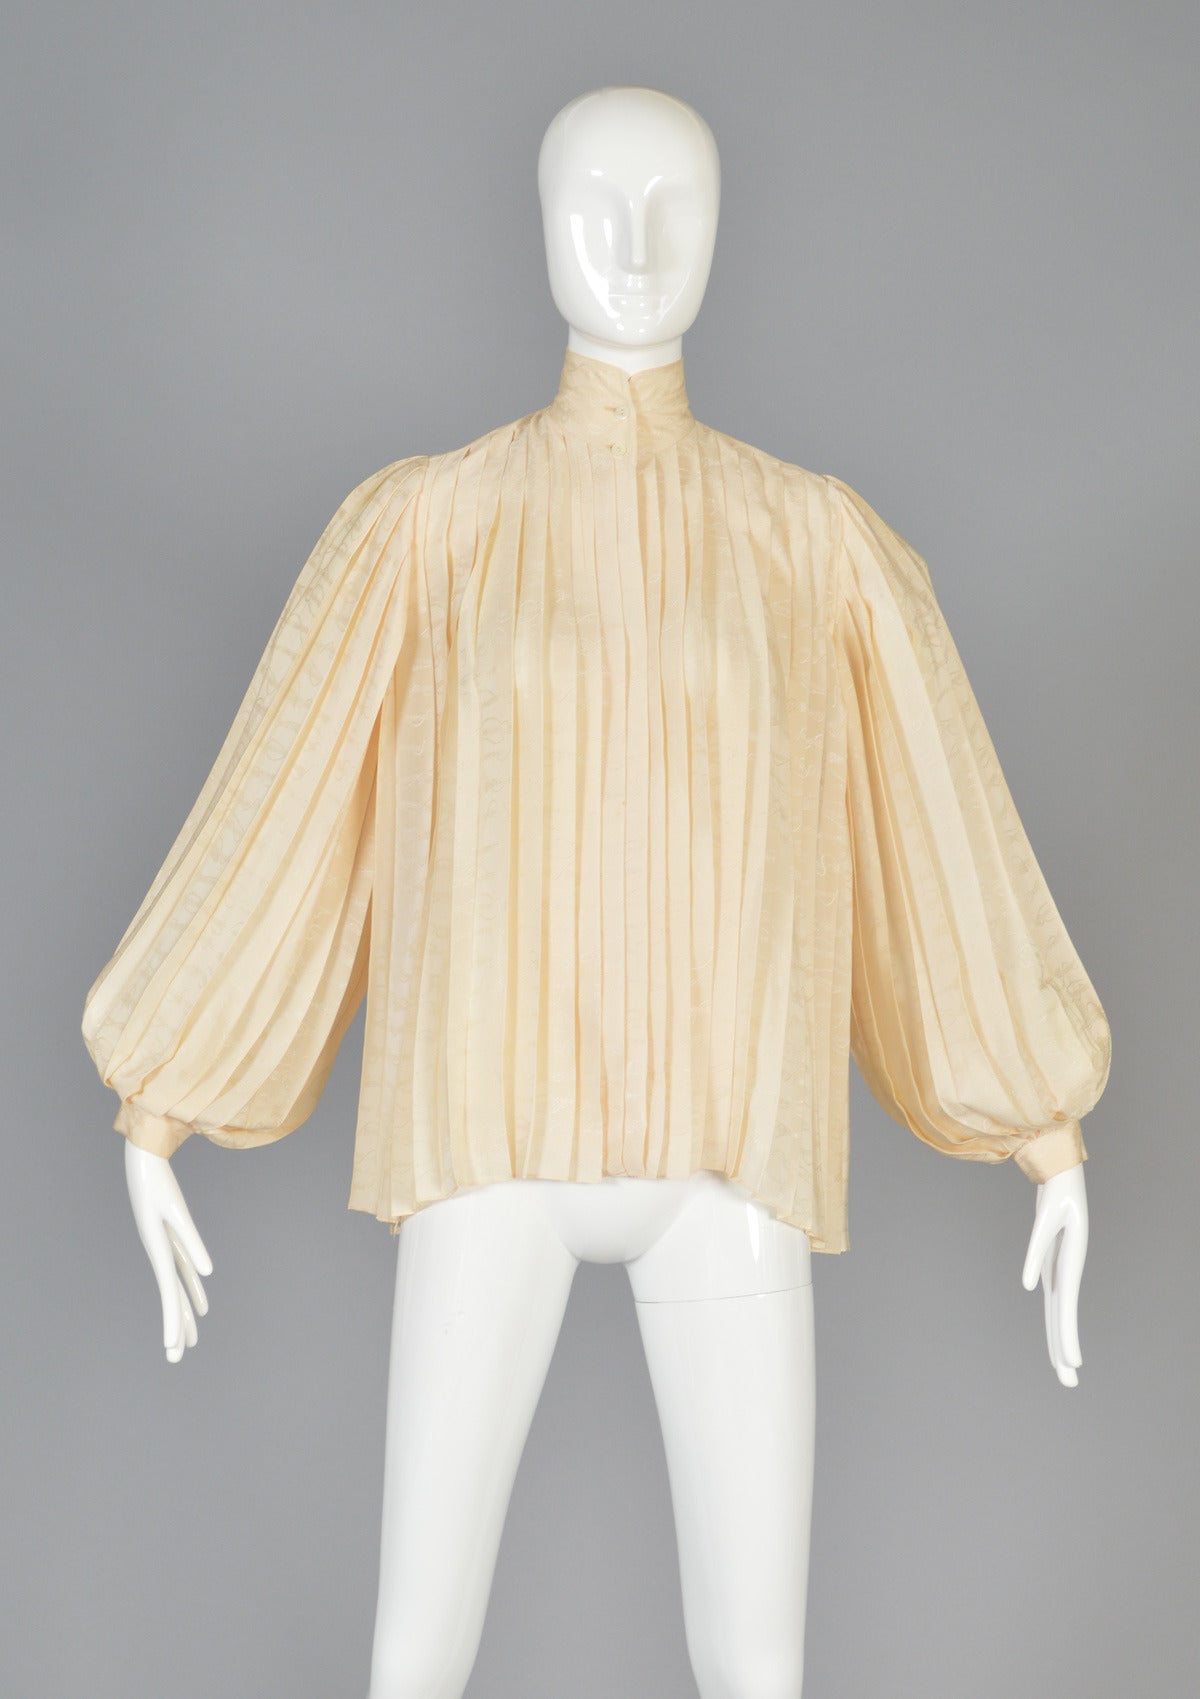 Spectacular late 70s/early 80s silk blouse by Gucci. Seriously one of THE BEST blouses we've come across! Stunning shimmery ivory silk has the classic Gucci rope and tassel motif woven throughout the fabric. The pleated body has a full 360 sweep